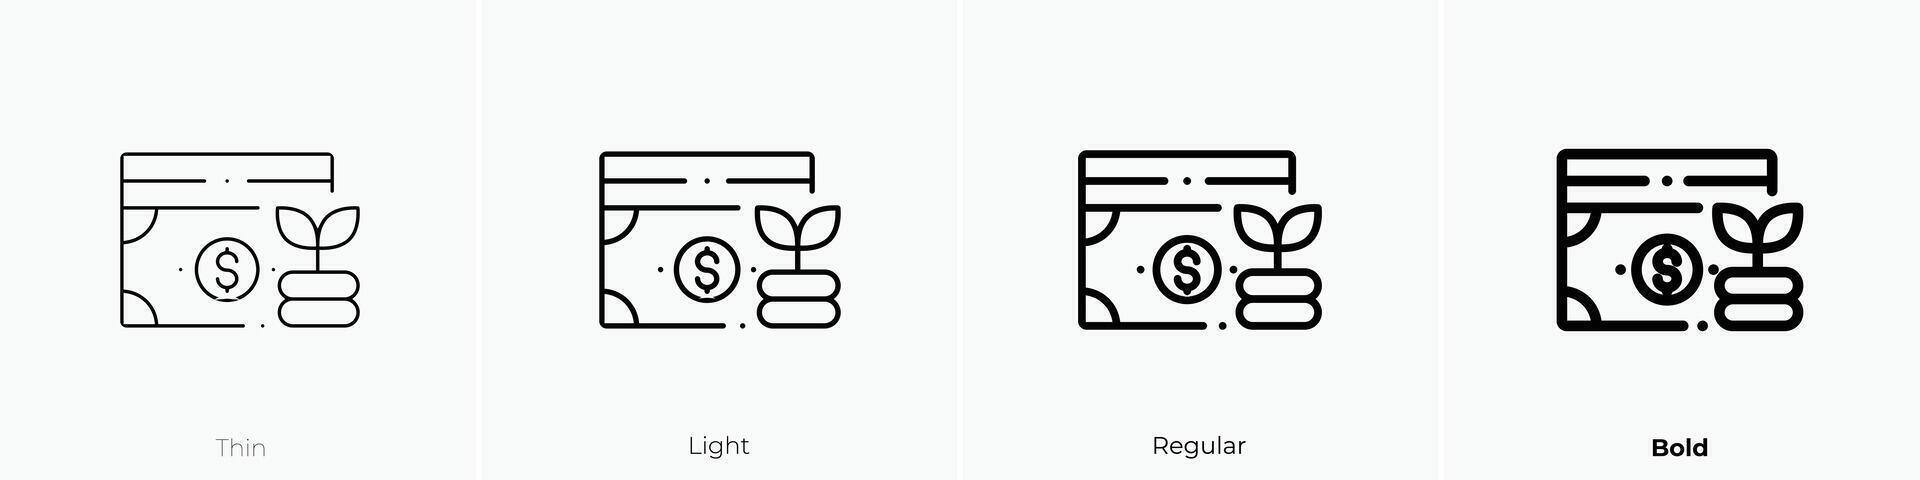 money icon. Thin, Light, Regular And Bold style design isolated on white background vector